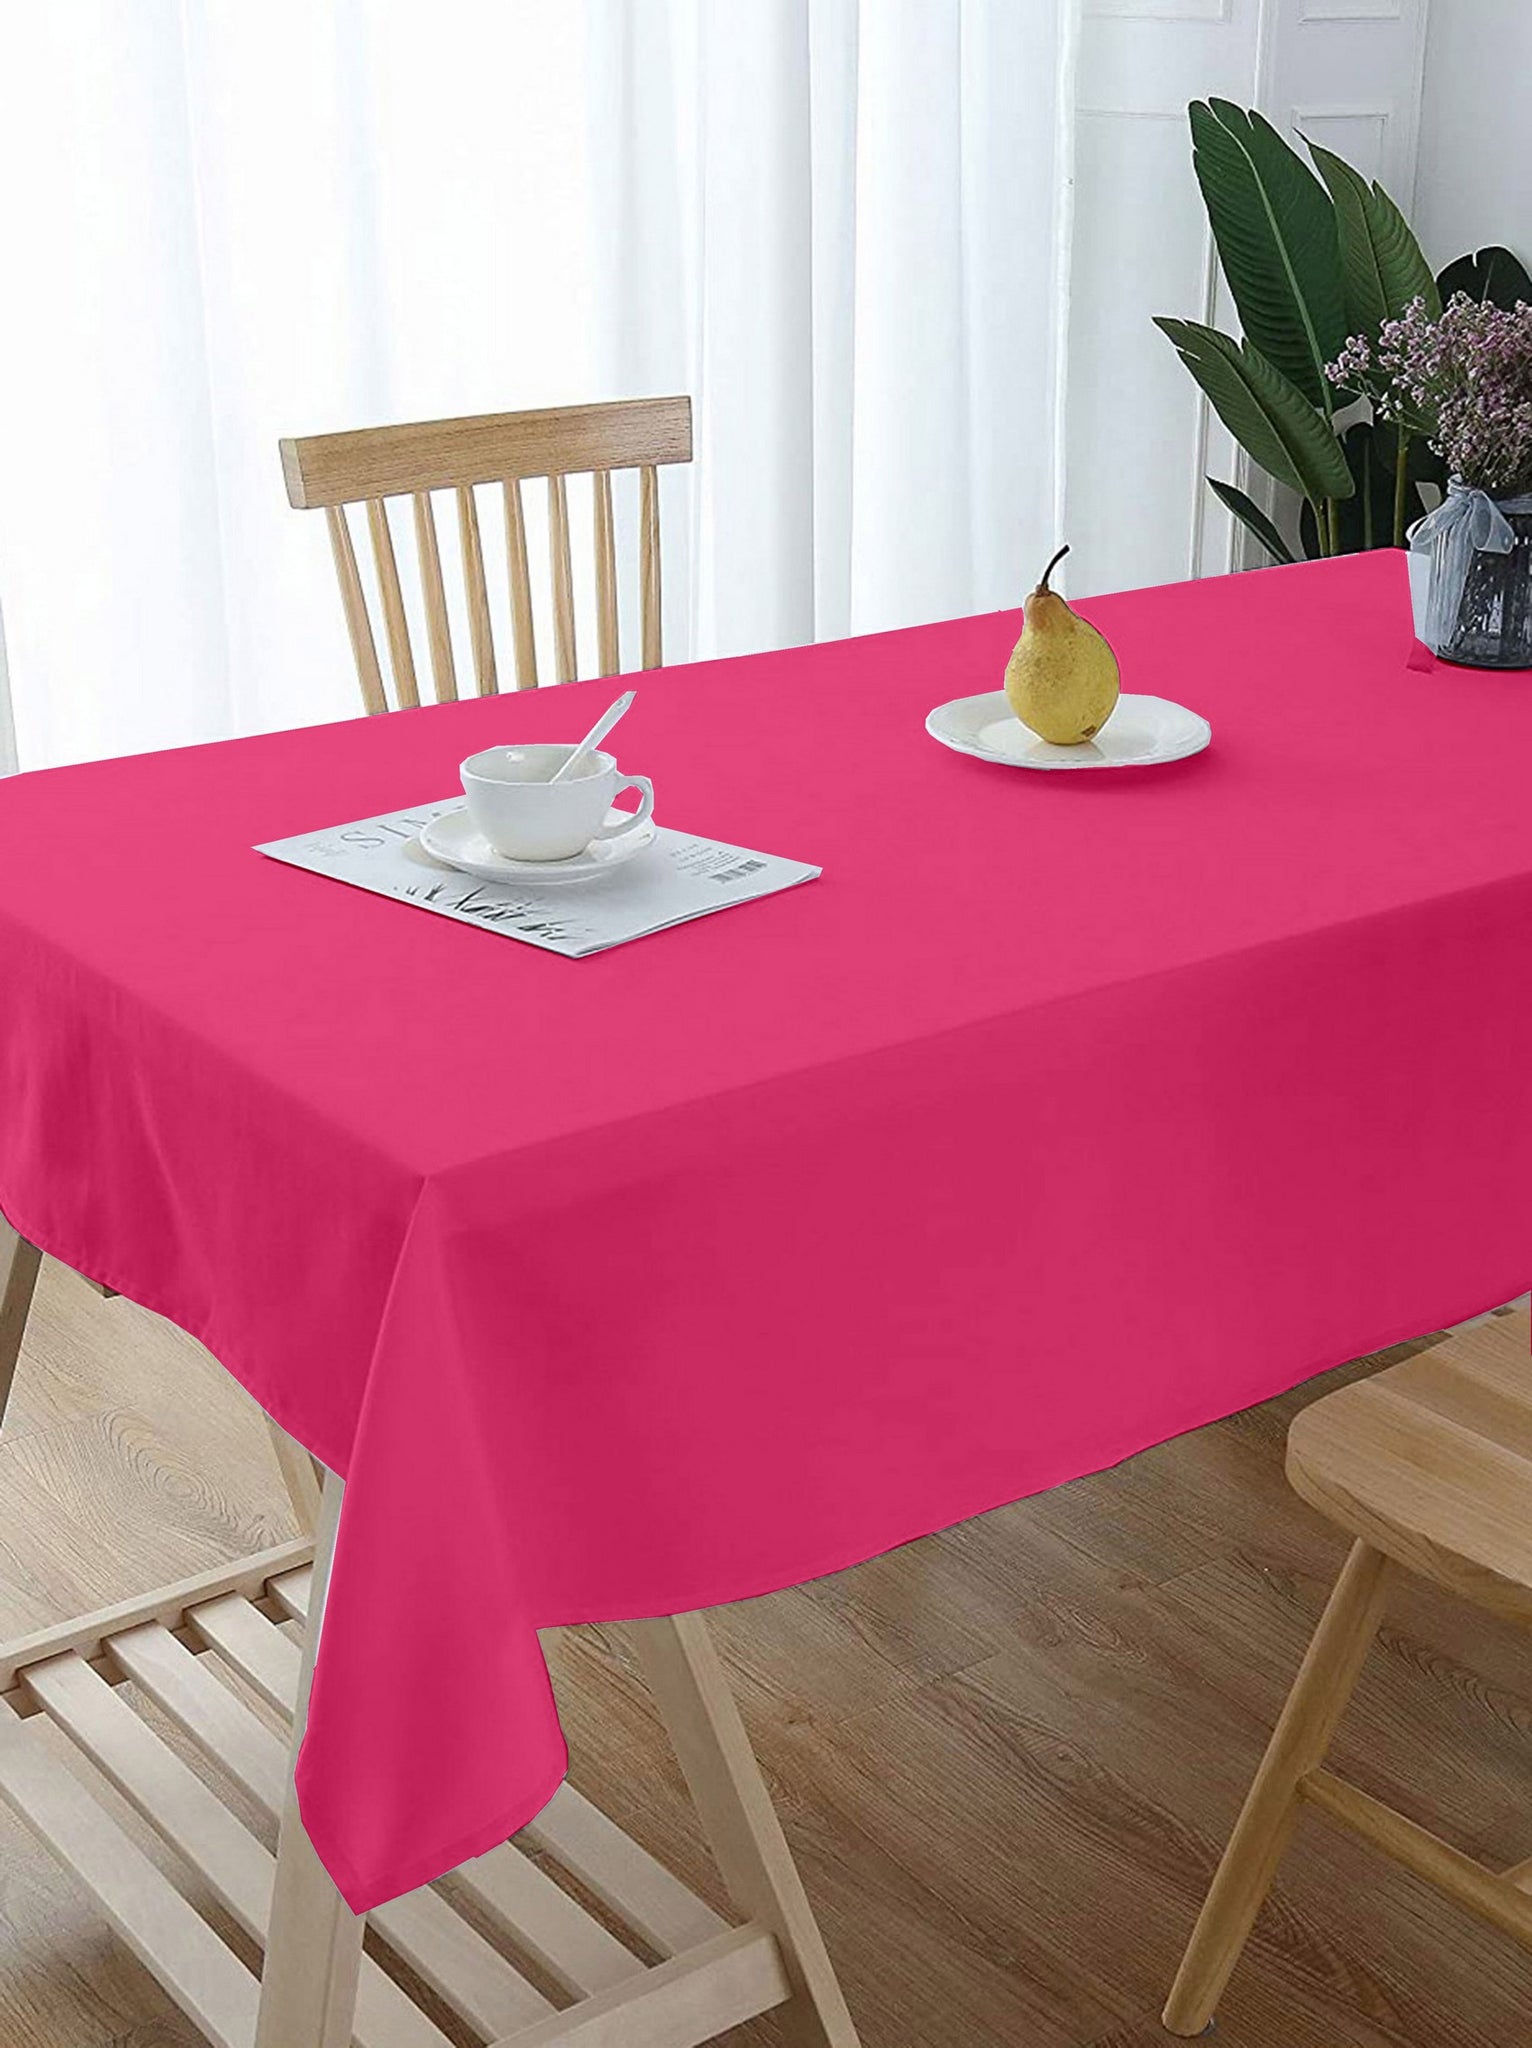 Lushomes center table cover, Rose Pink, Classic Plain Dining Table Cover Cloth (Size 36 x 60”, Center Table Cloth)